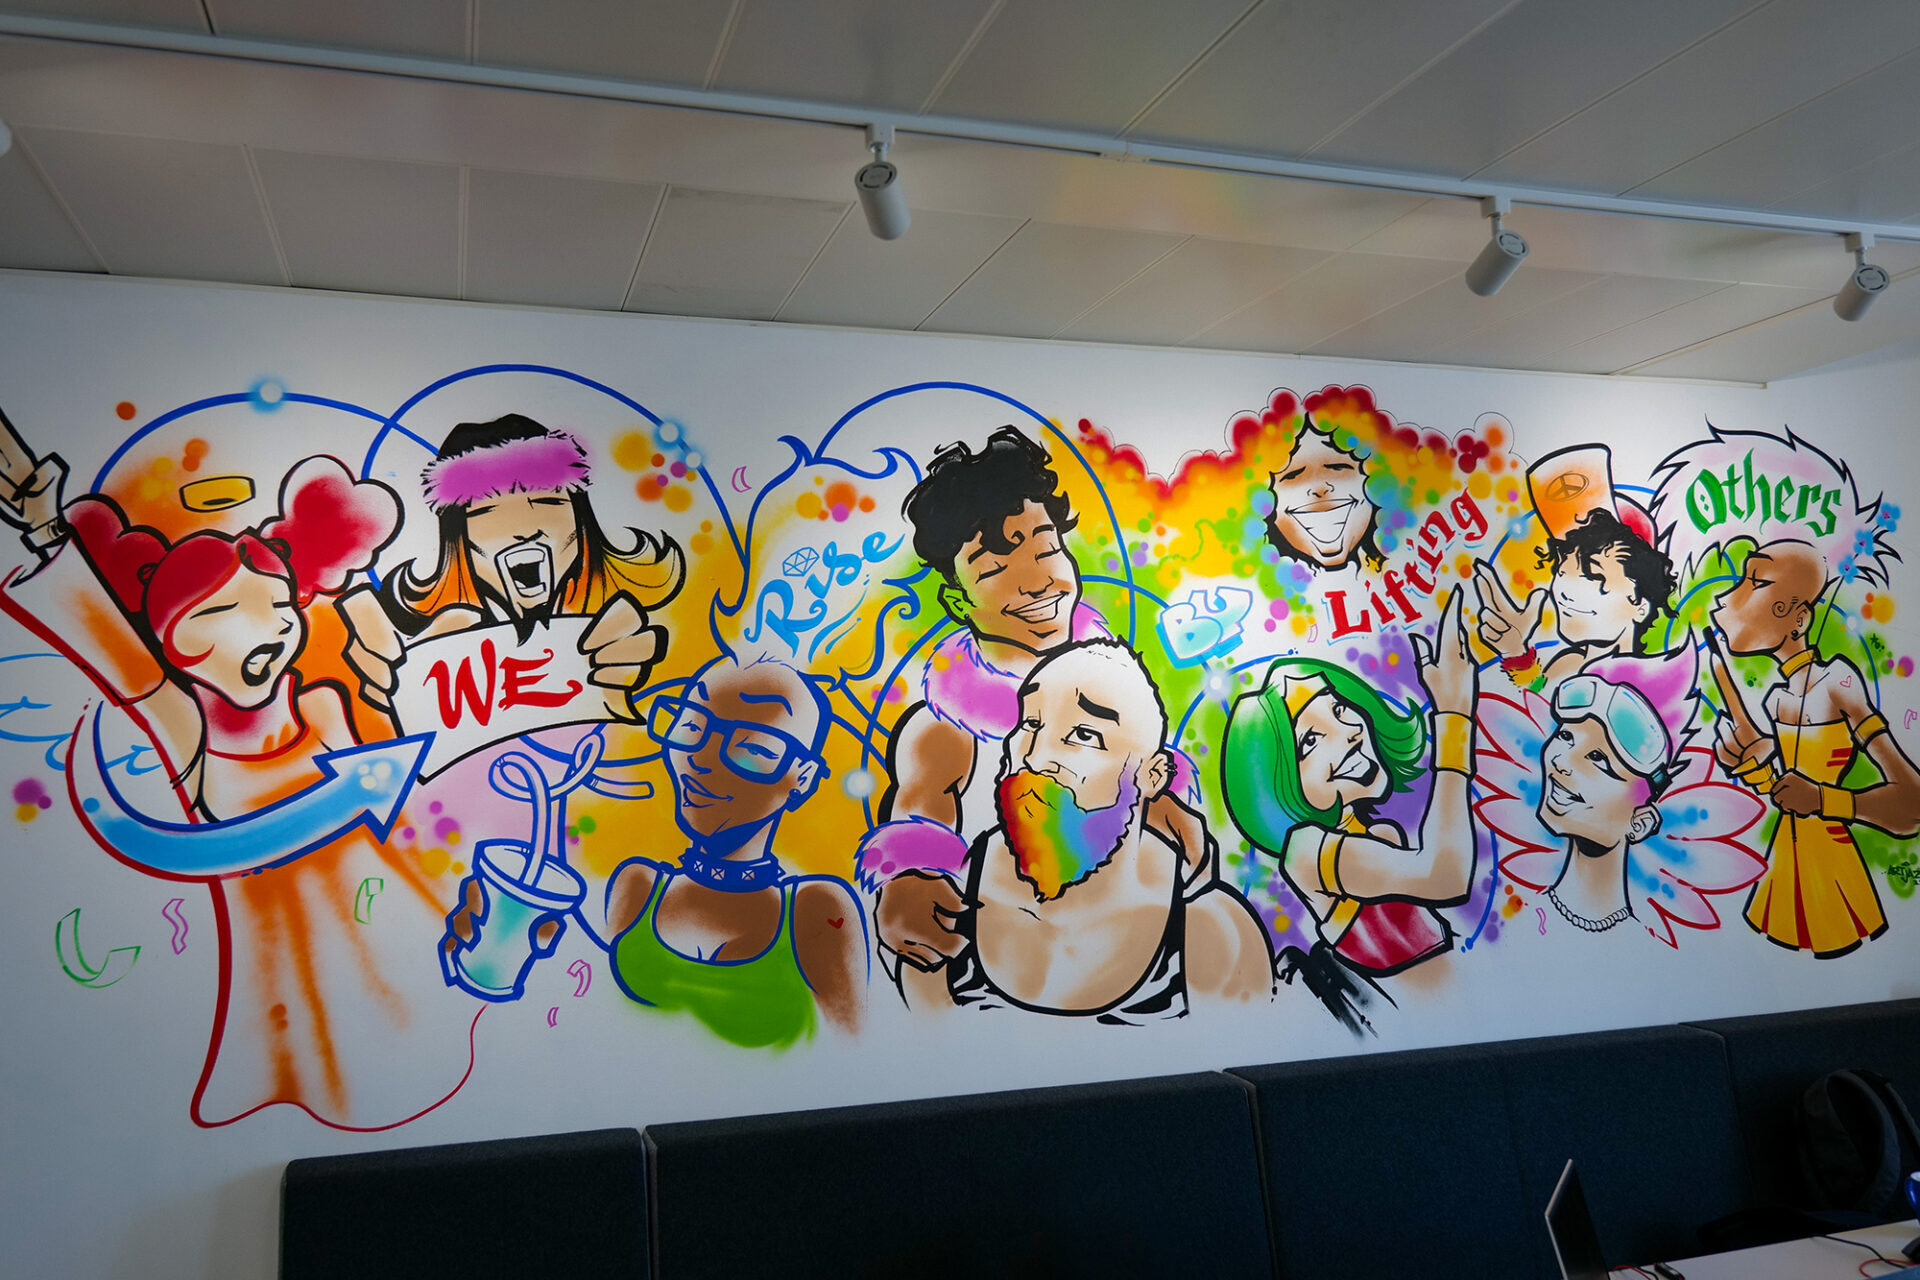 Colourful graffiti mural in the7stars Reception area of various people with text saying "We rise by lifting others"